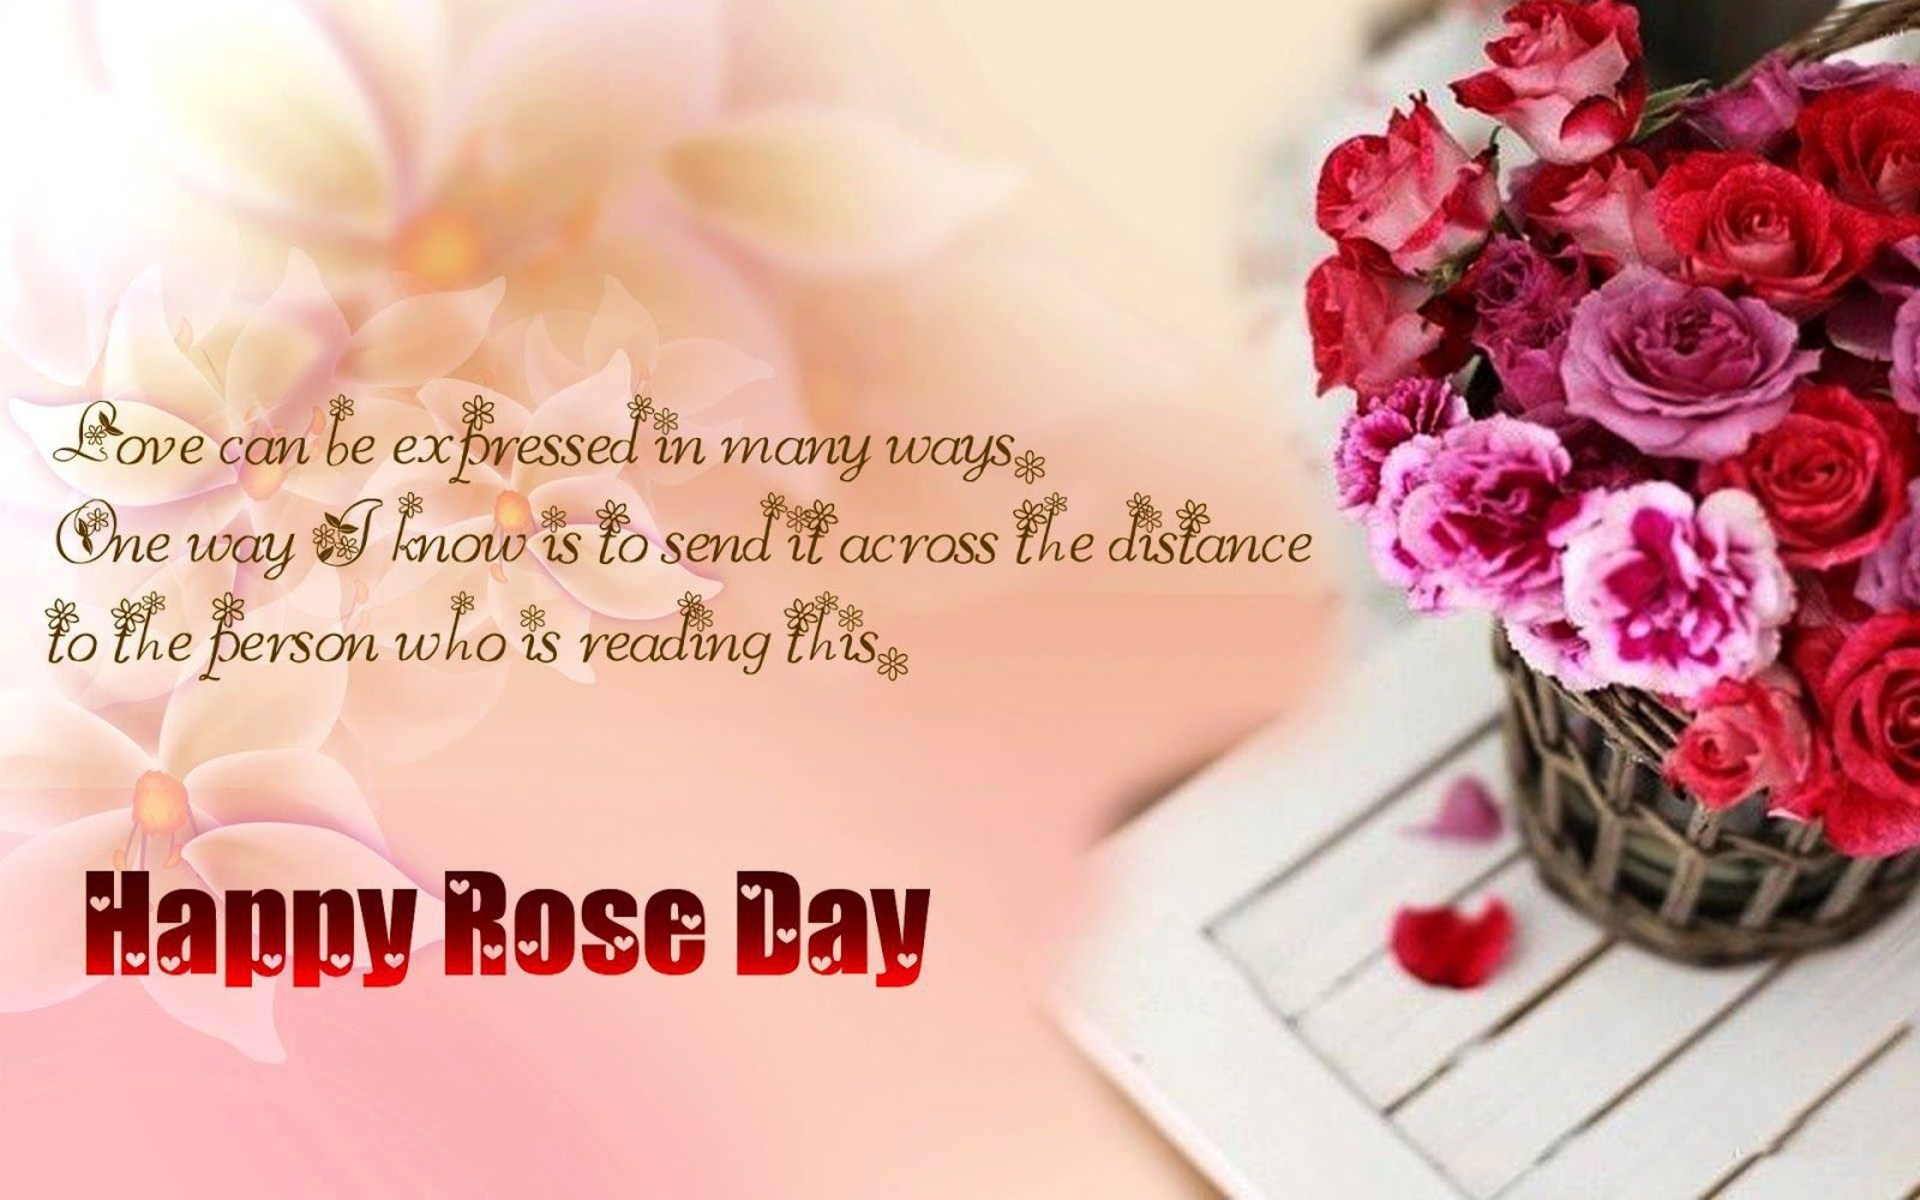 Happy Rose Day 2019 Images Download , HD Wallpaper & Backgrounds